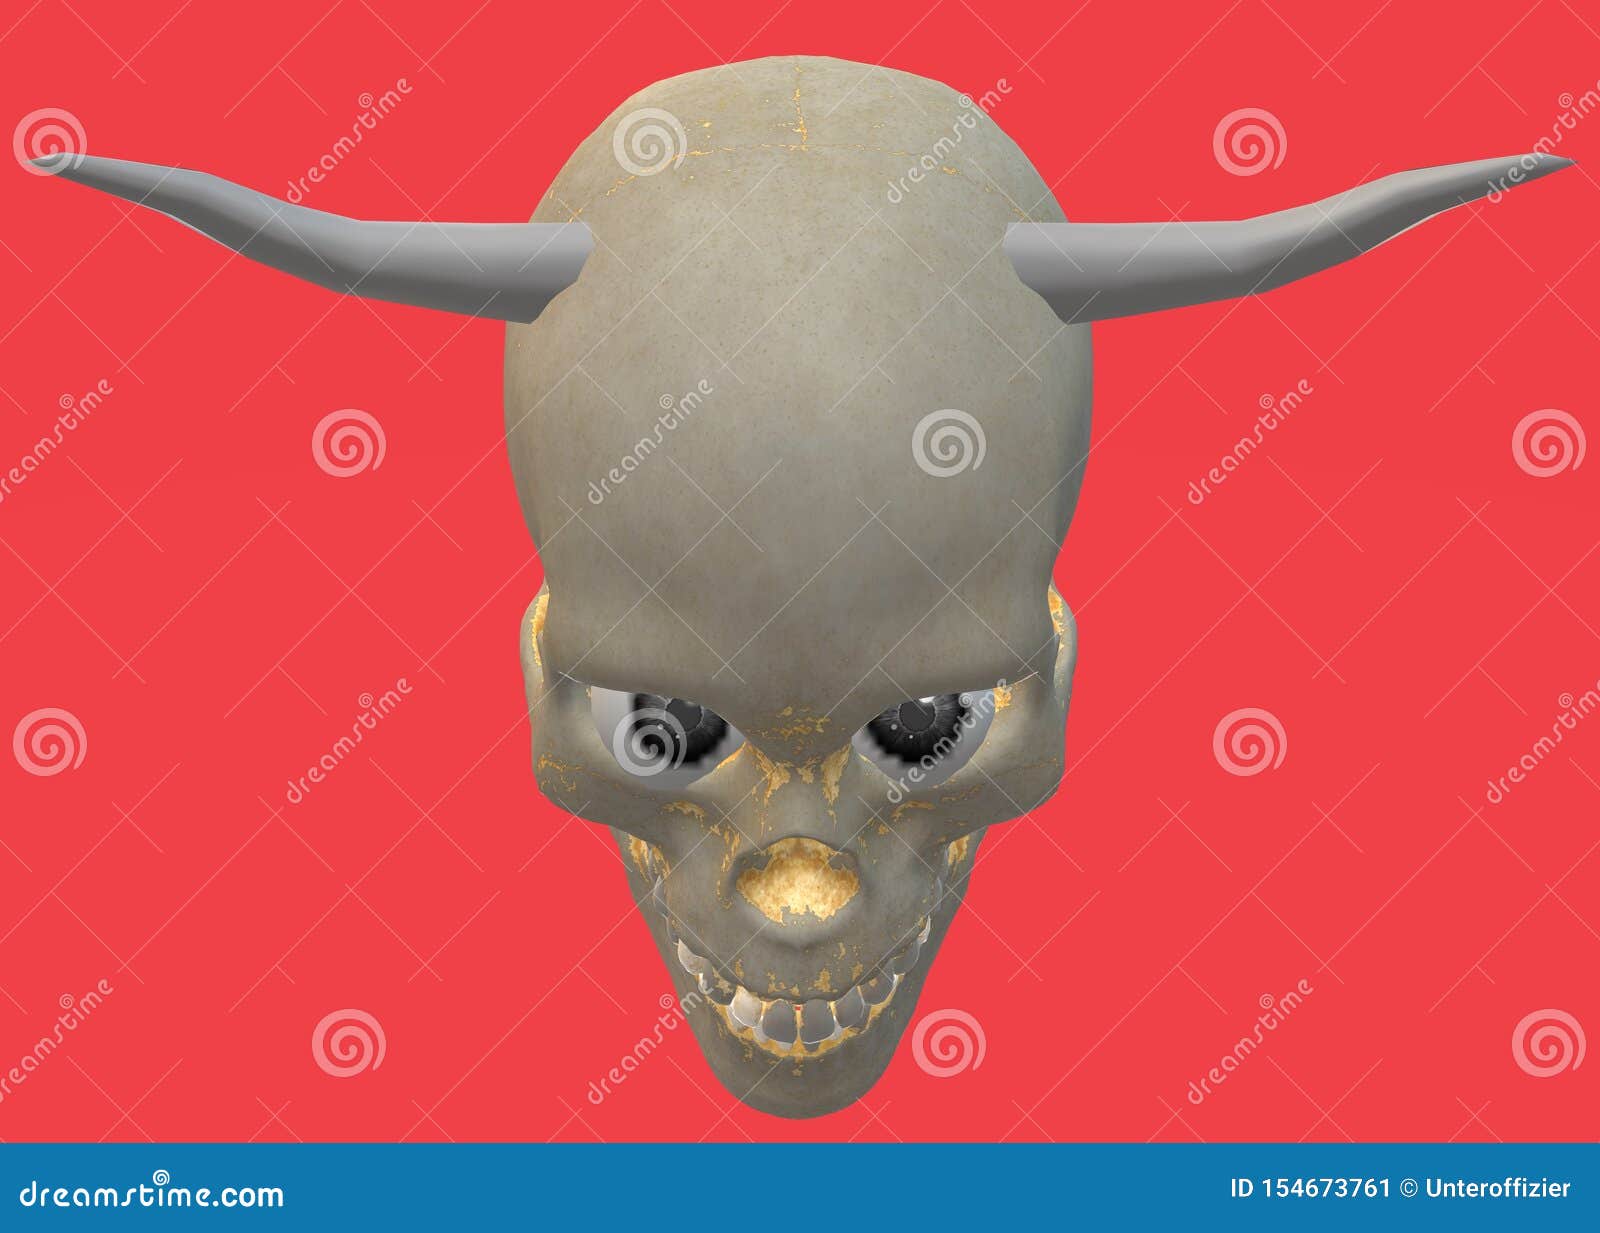 overdraw kaldenavn Forladt Top Down View of a Human Skull with Devil Horns and Menacing Threatening  Look Stock Illustration - Illustration of anatomy, foreboding: 154673761